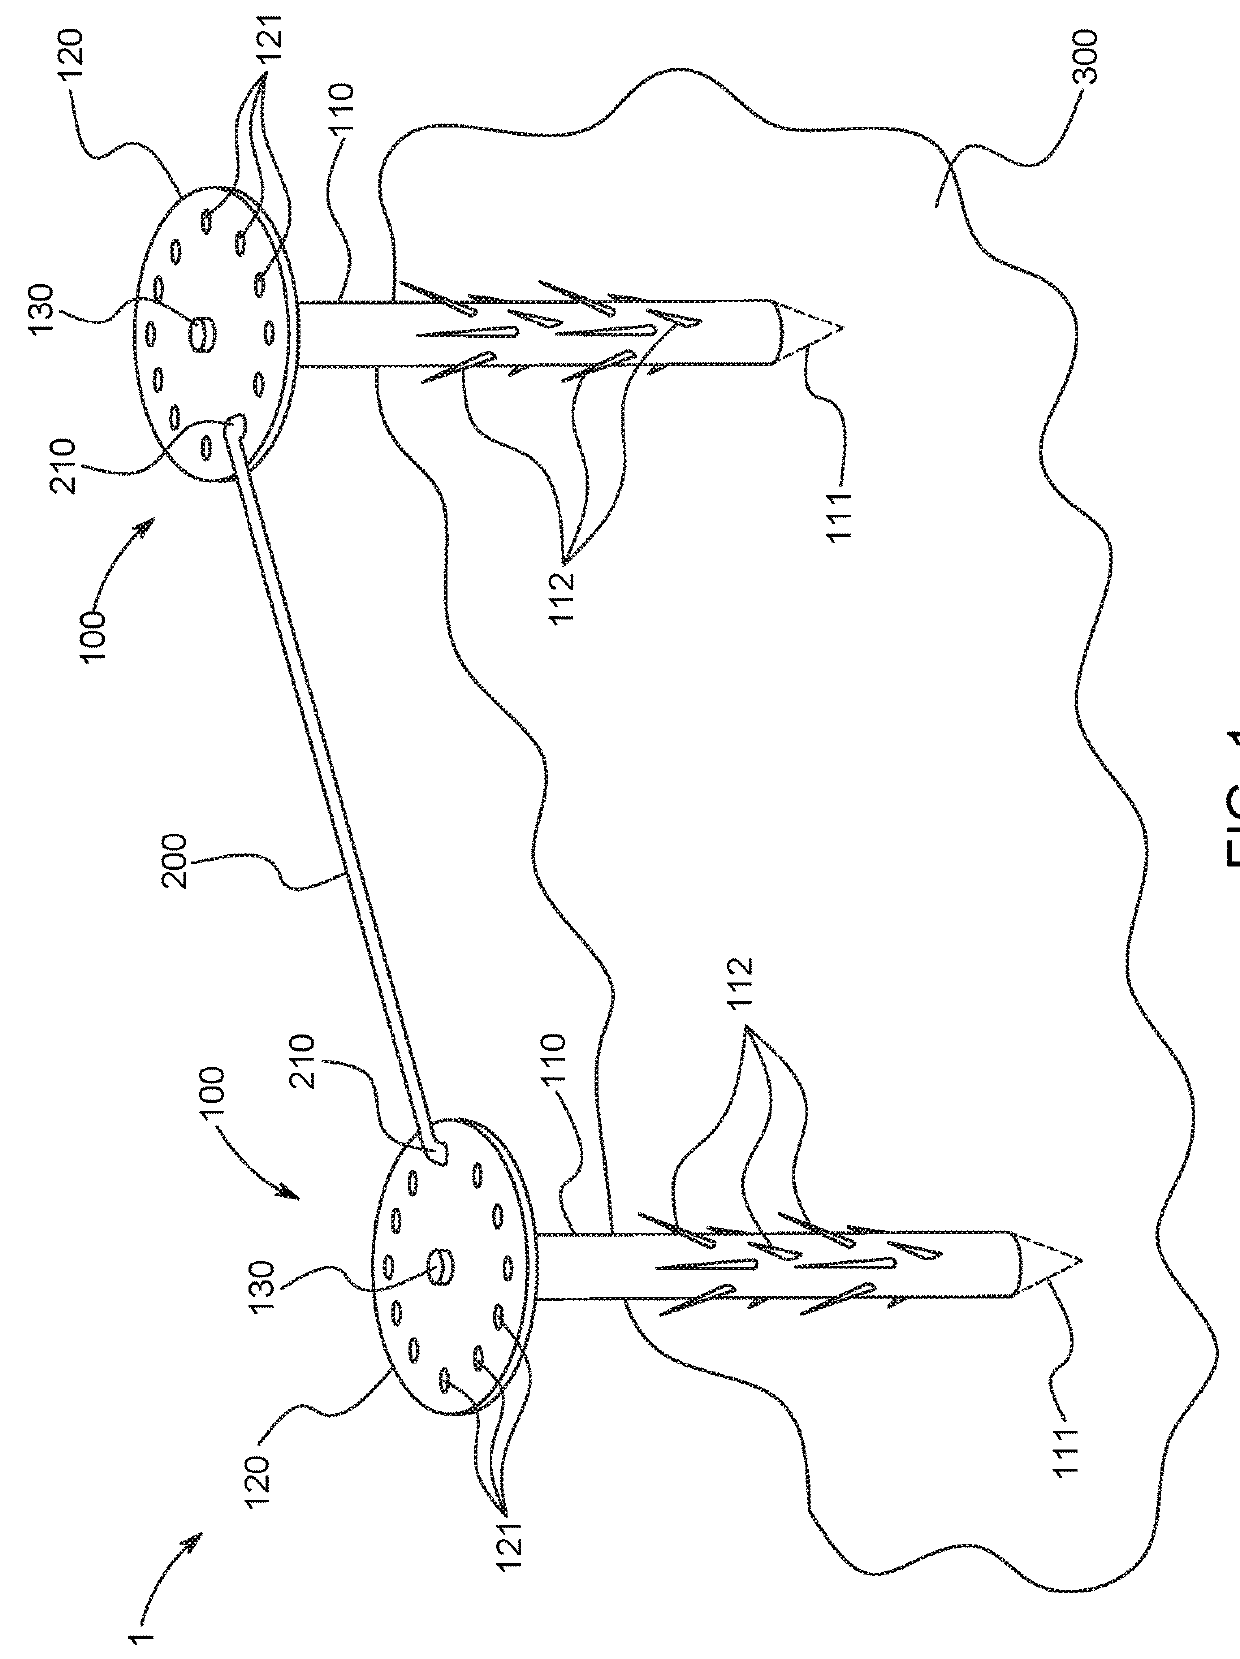 Weed growth suppression device